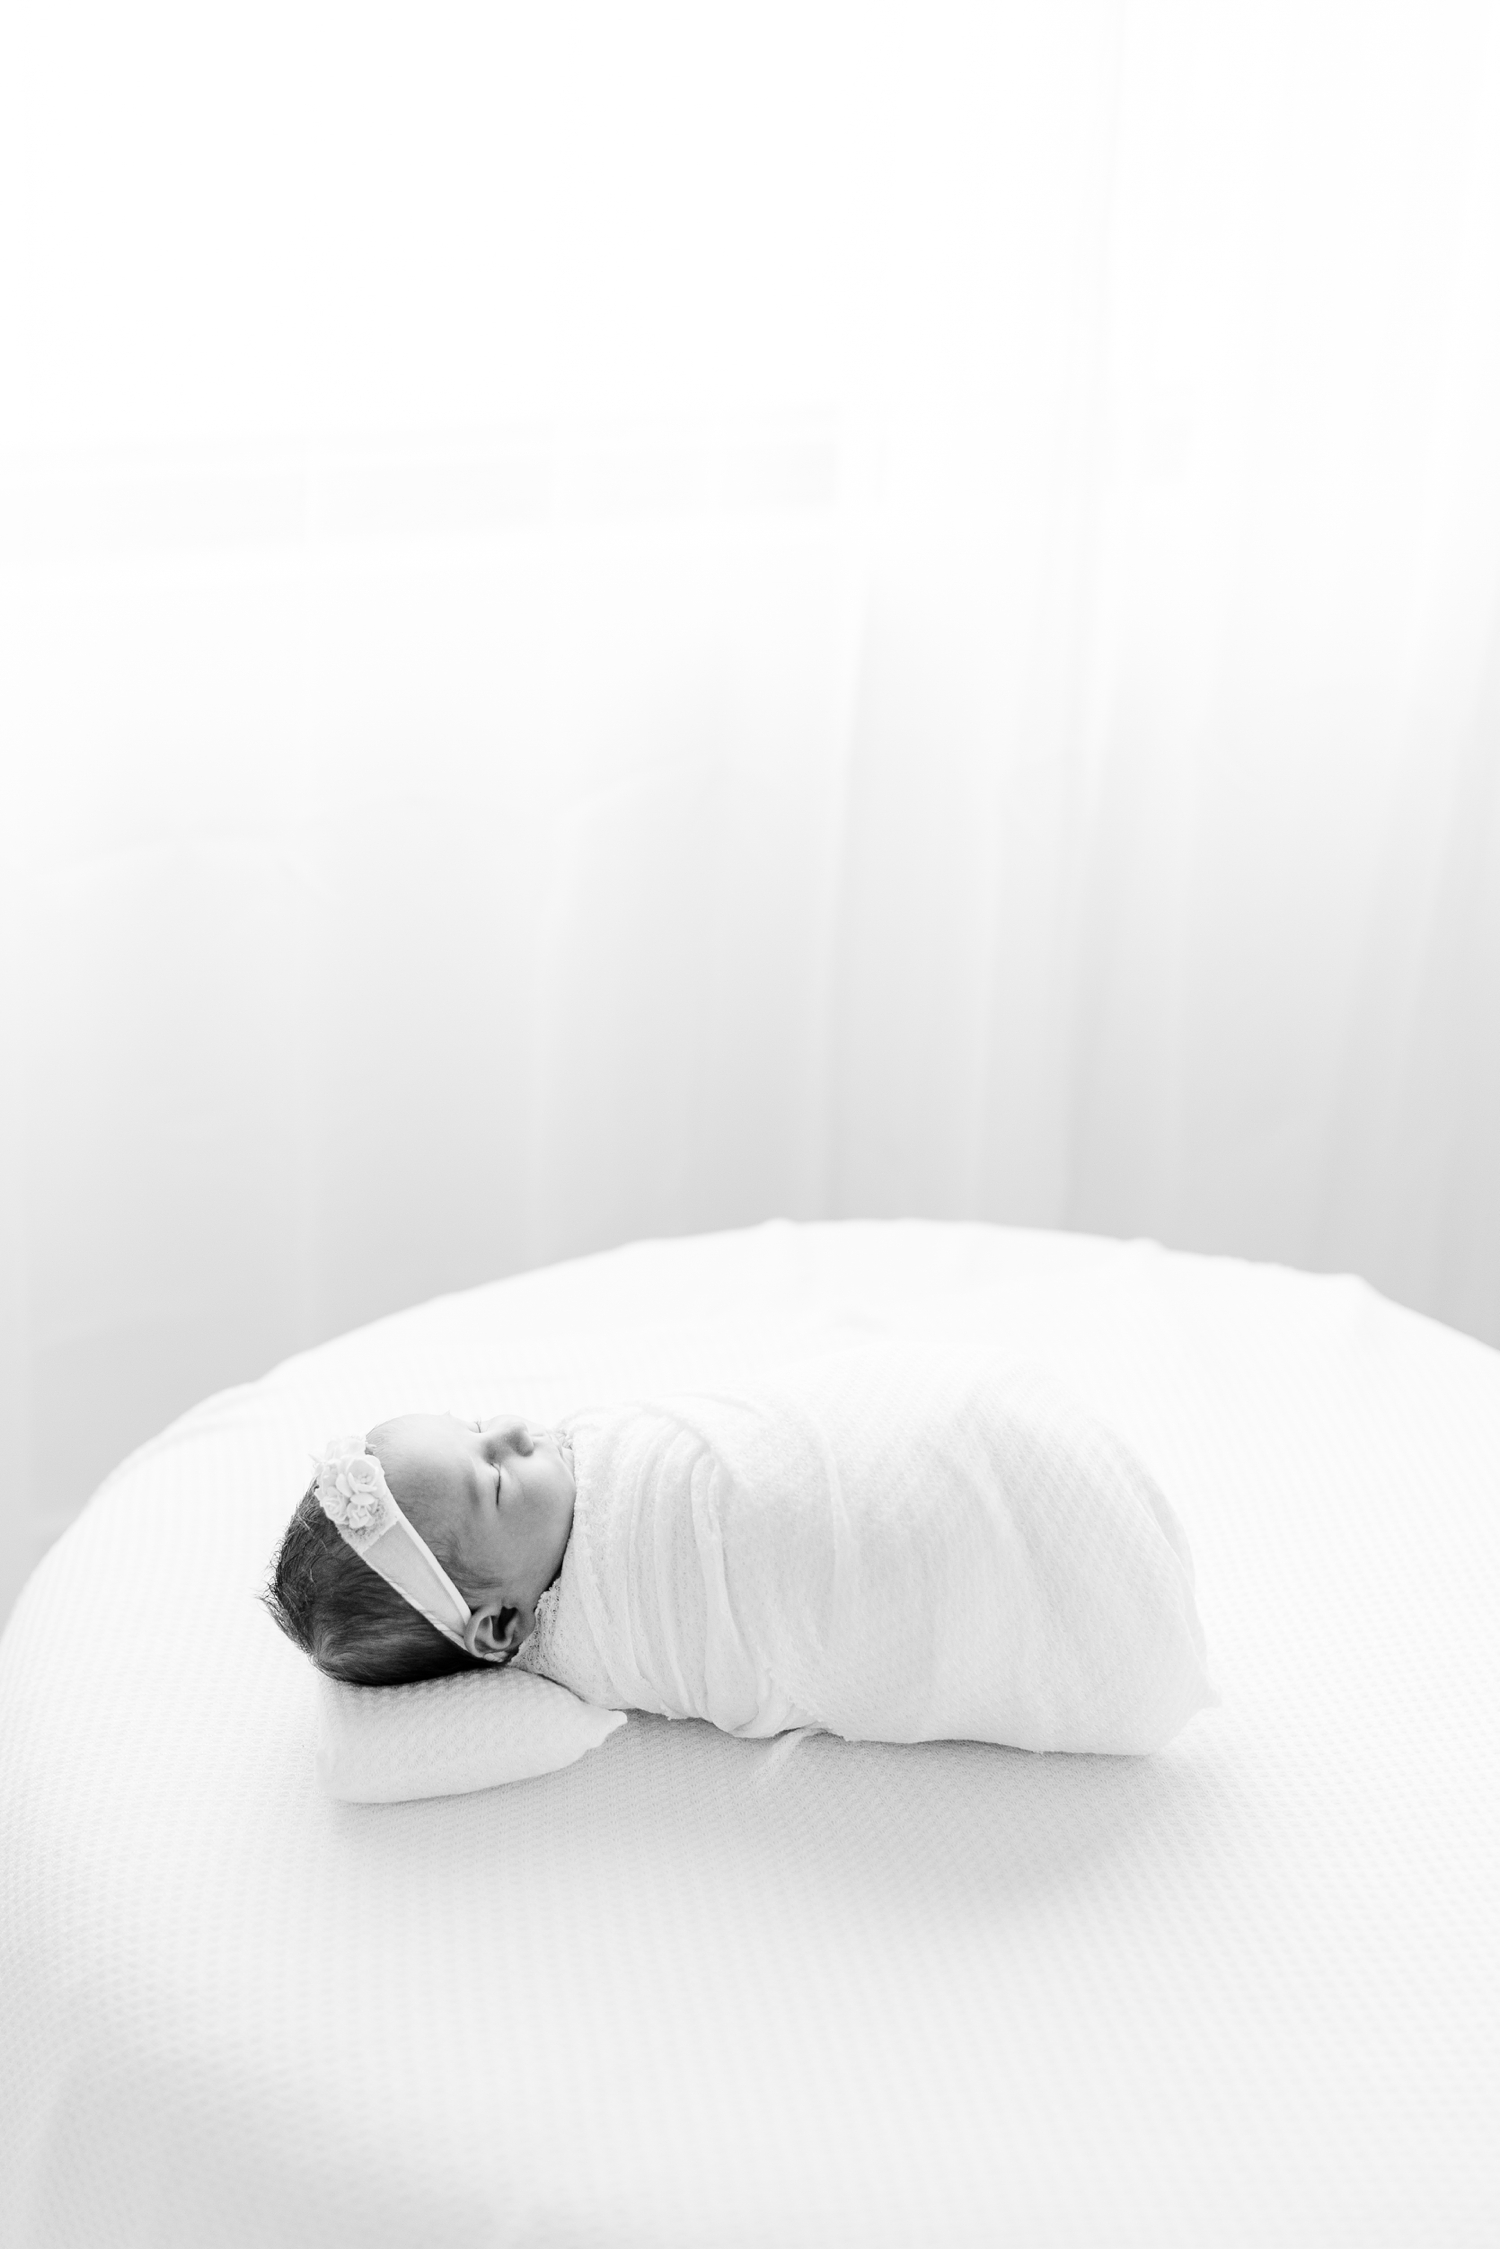 Baby Ivy wrapped in white laying on a white ottoman with white curtains and window in the background | CB Studio